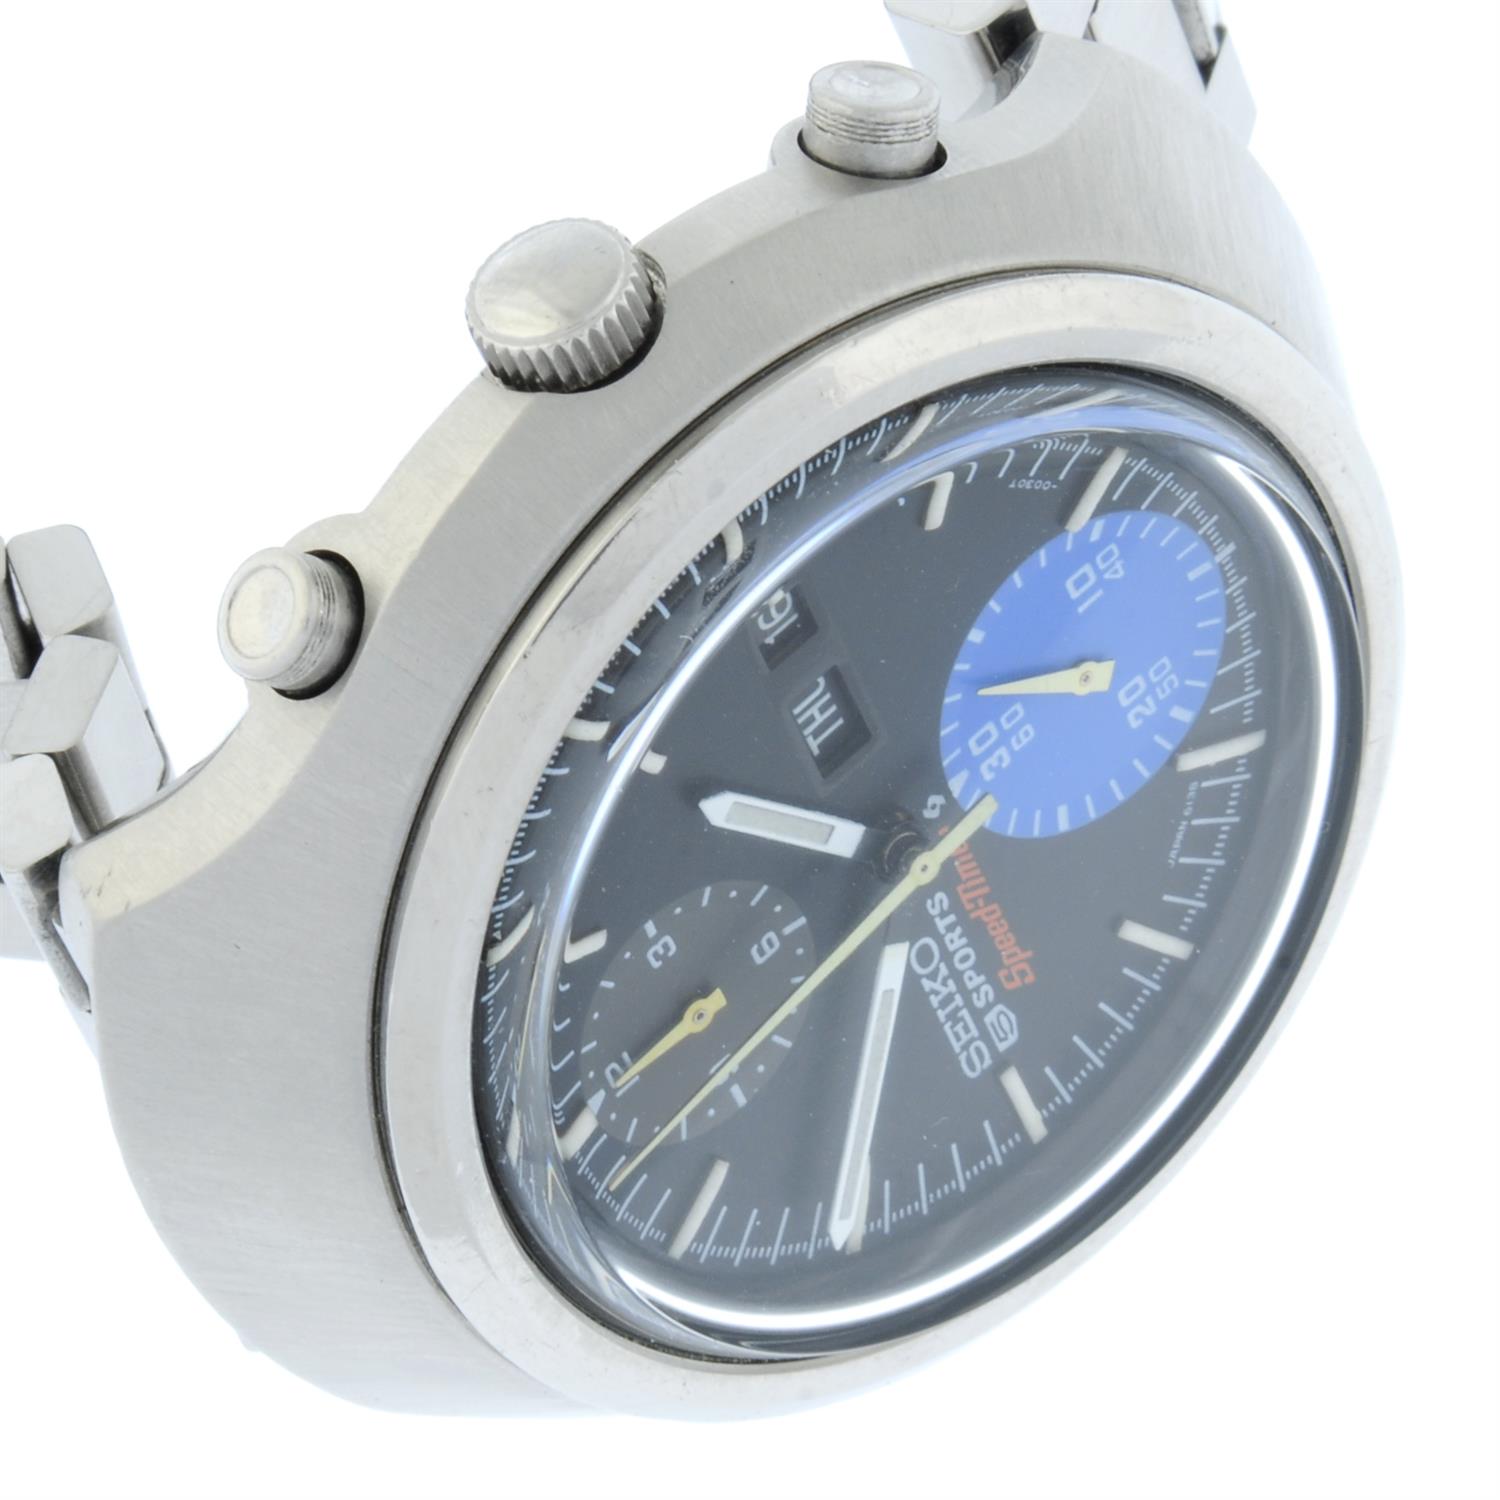 Seiko - a Speed-Timer chronograph watch, 42mm. - Image 3 of 4